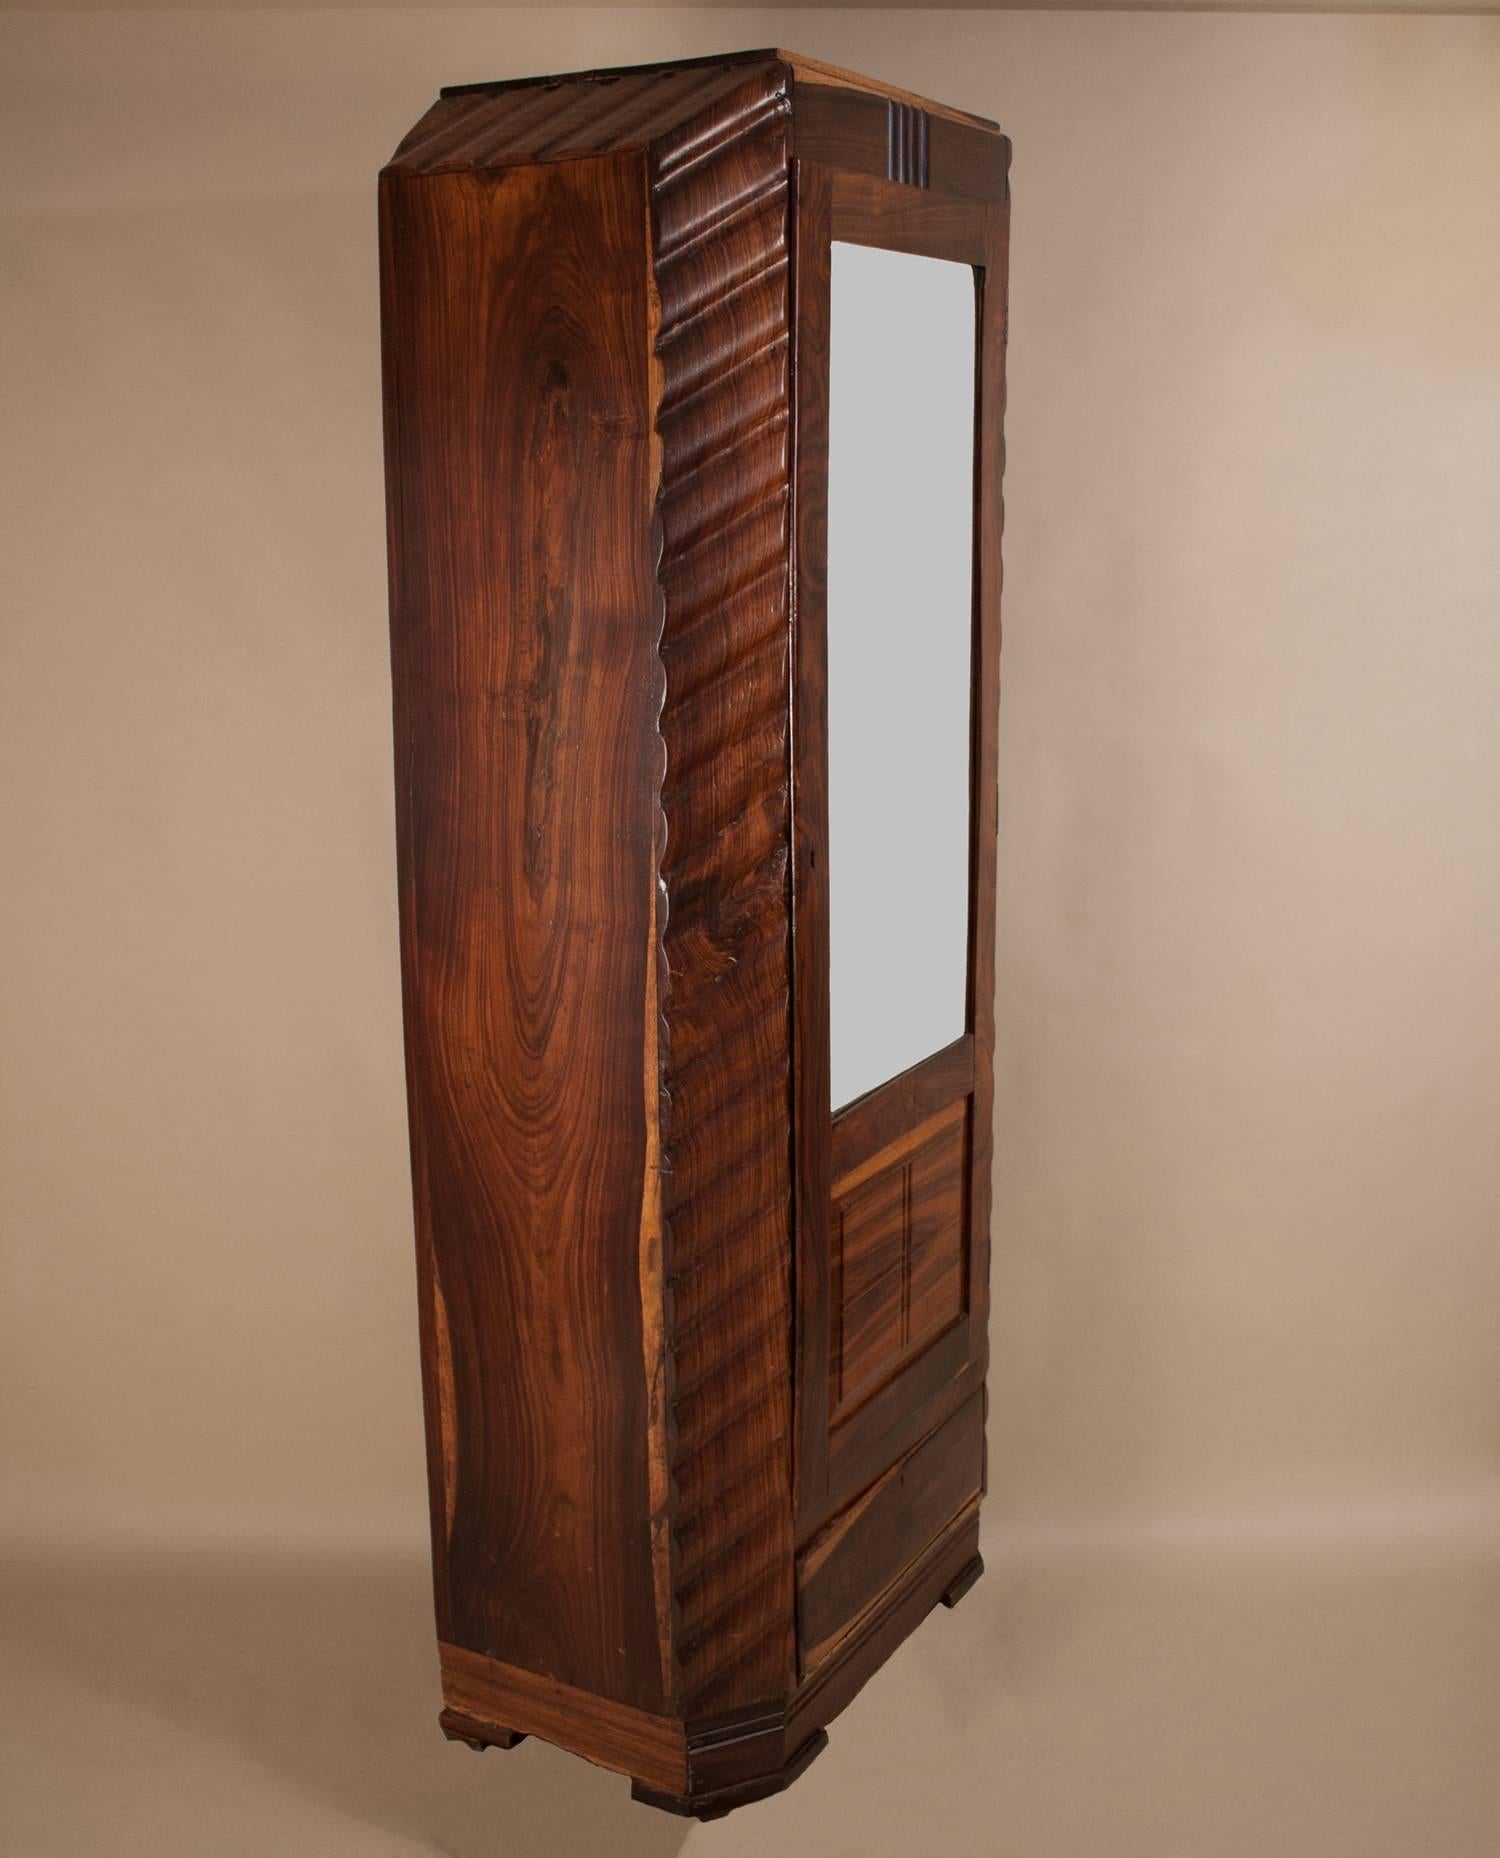 Tall, slender Art Deco wardrobe in rosewood with a rich grain and interesting tonal variations. The cabinet is carved with a consistent wave pattern and has a flattering 3/4-length mirror door with working lock and key. There are two drawers for